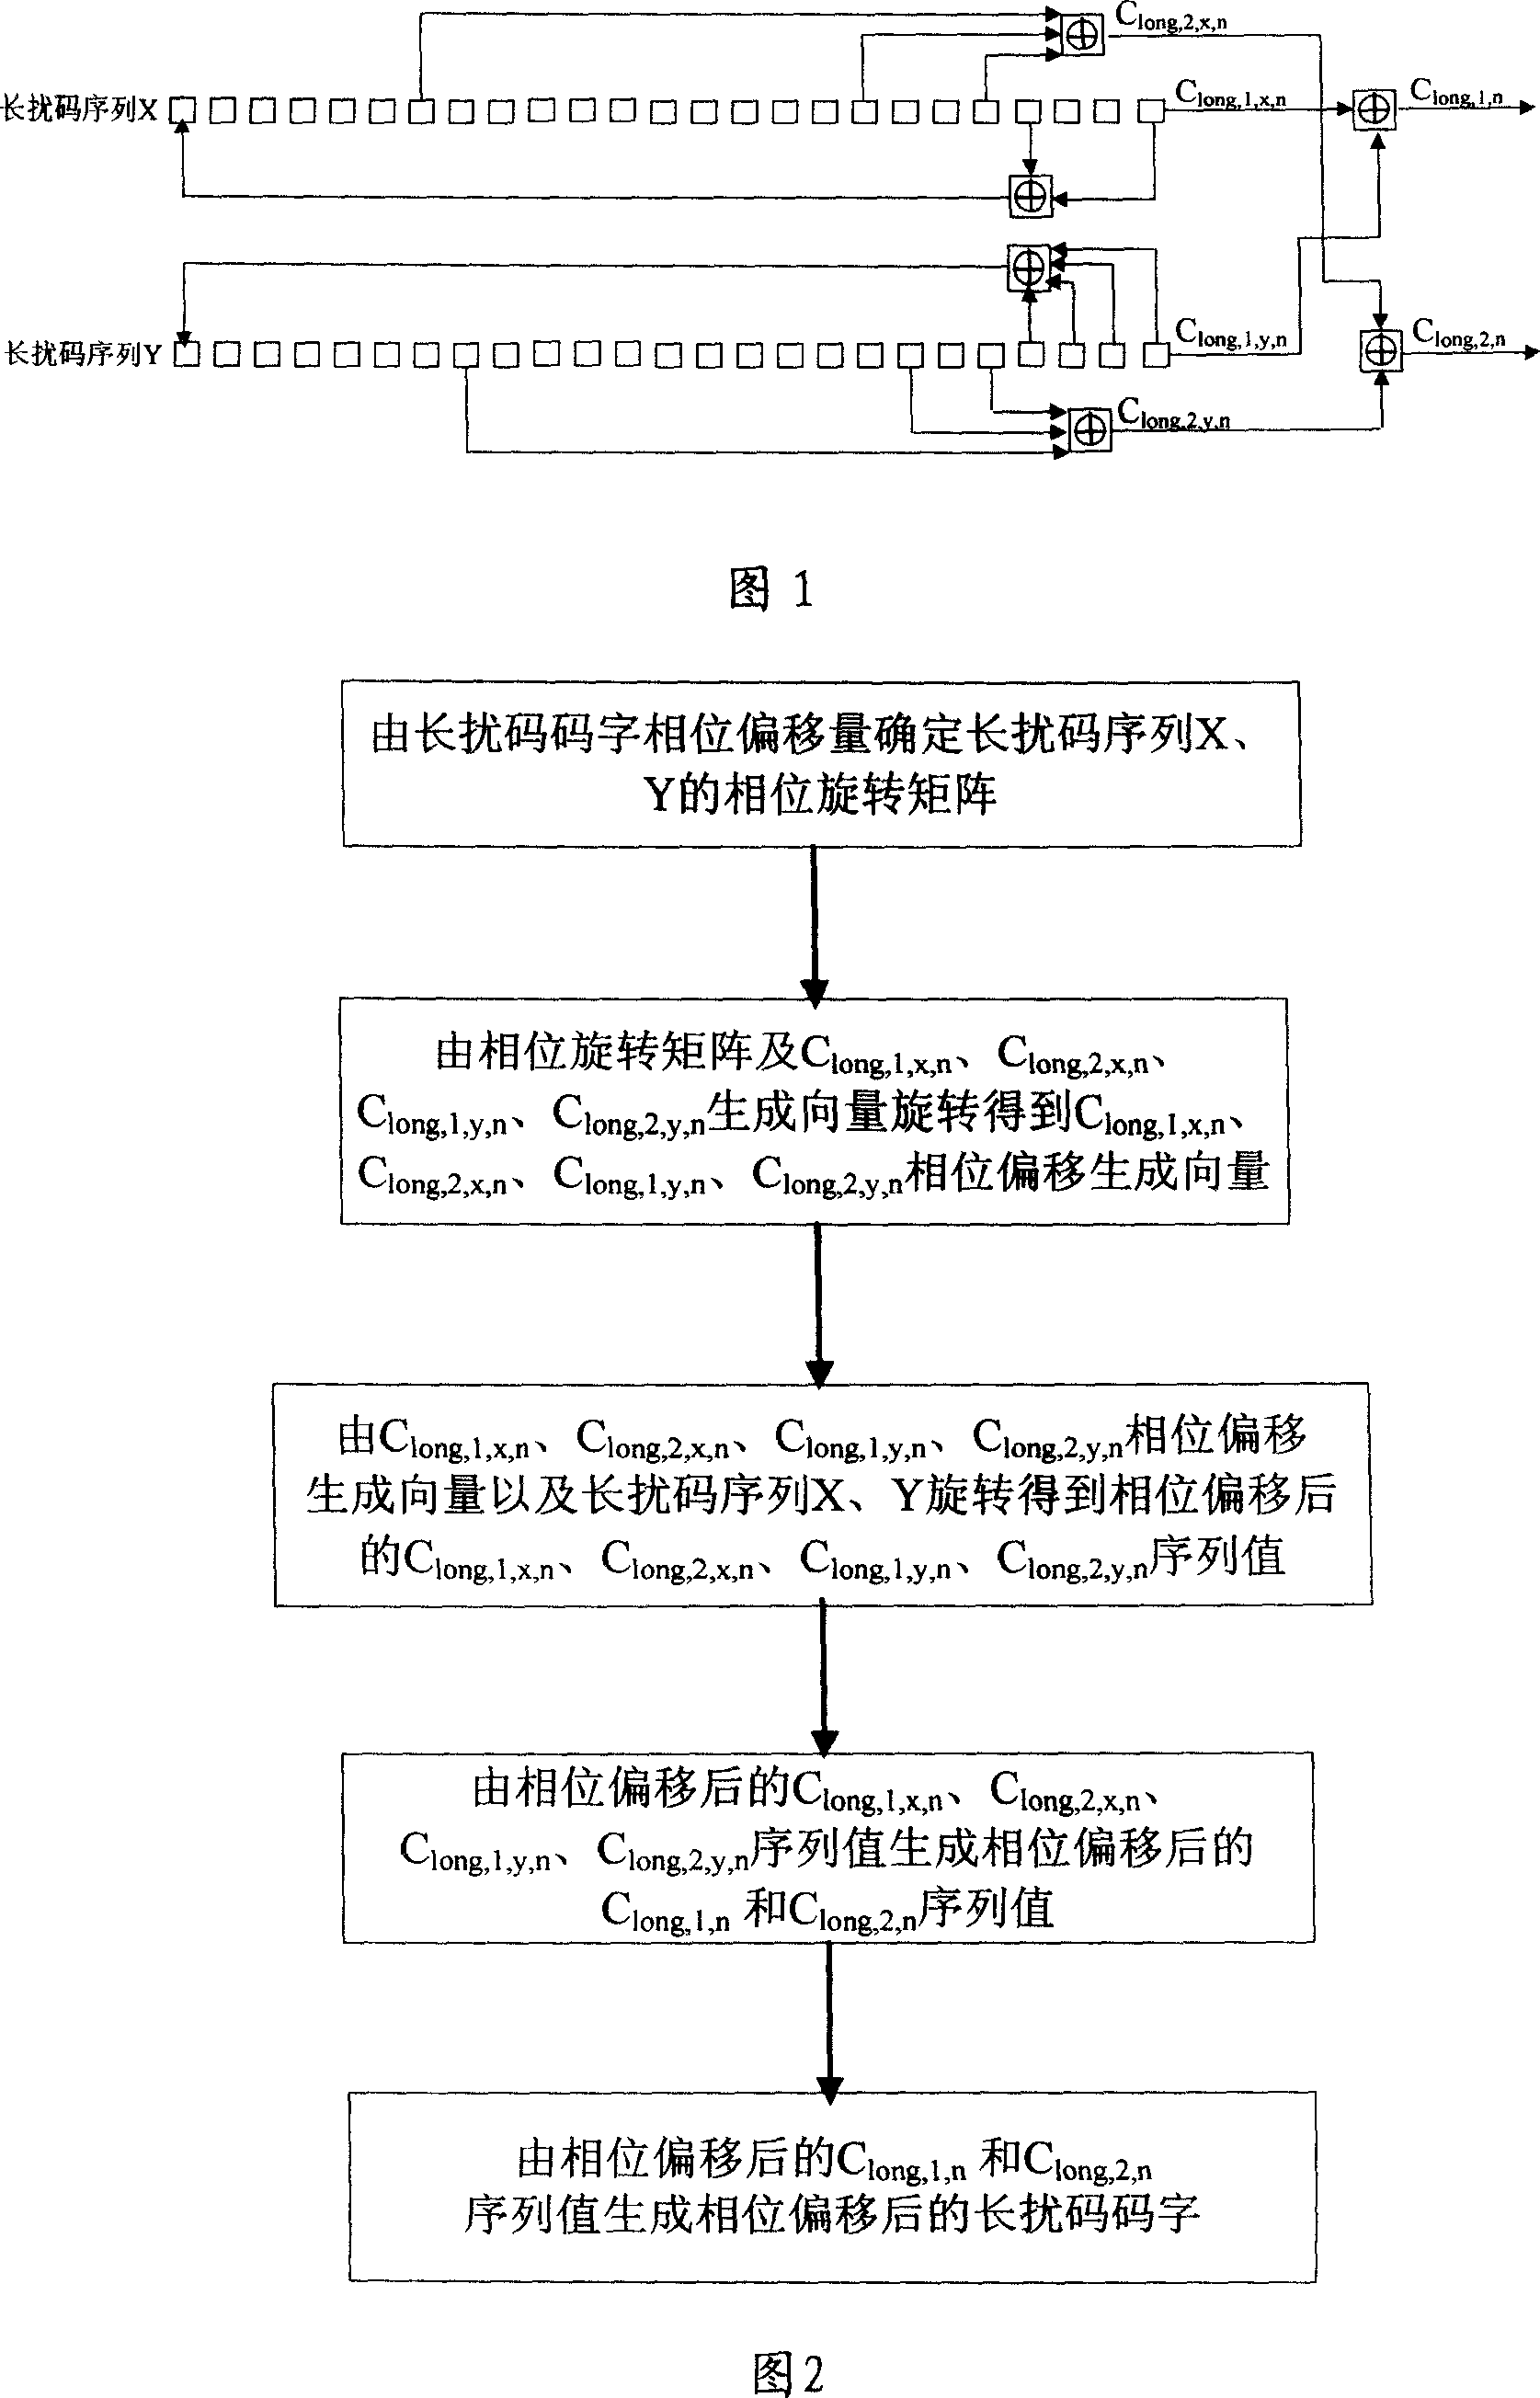 Method and apparatus for creating long scrambling code and phase offset code